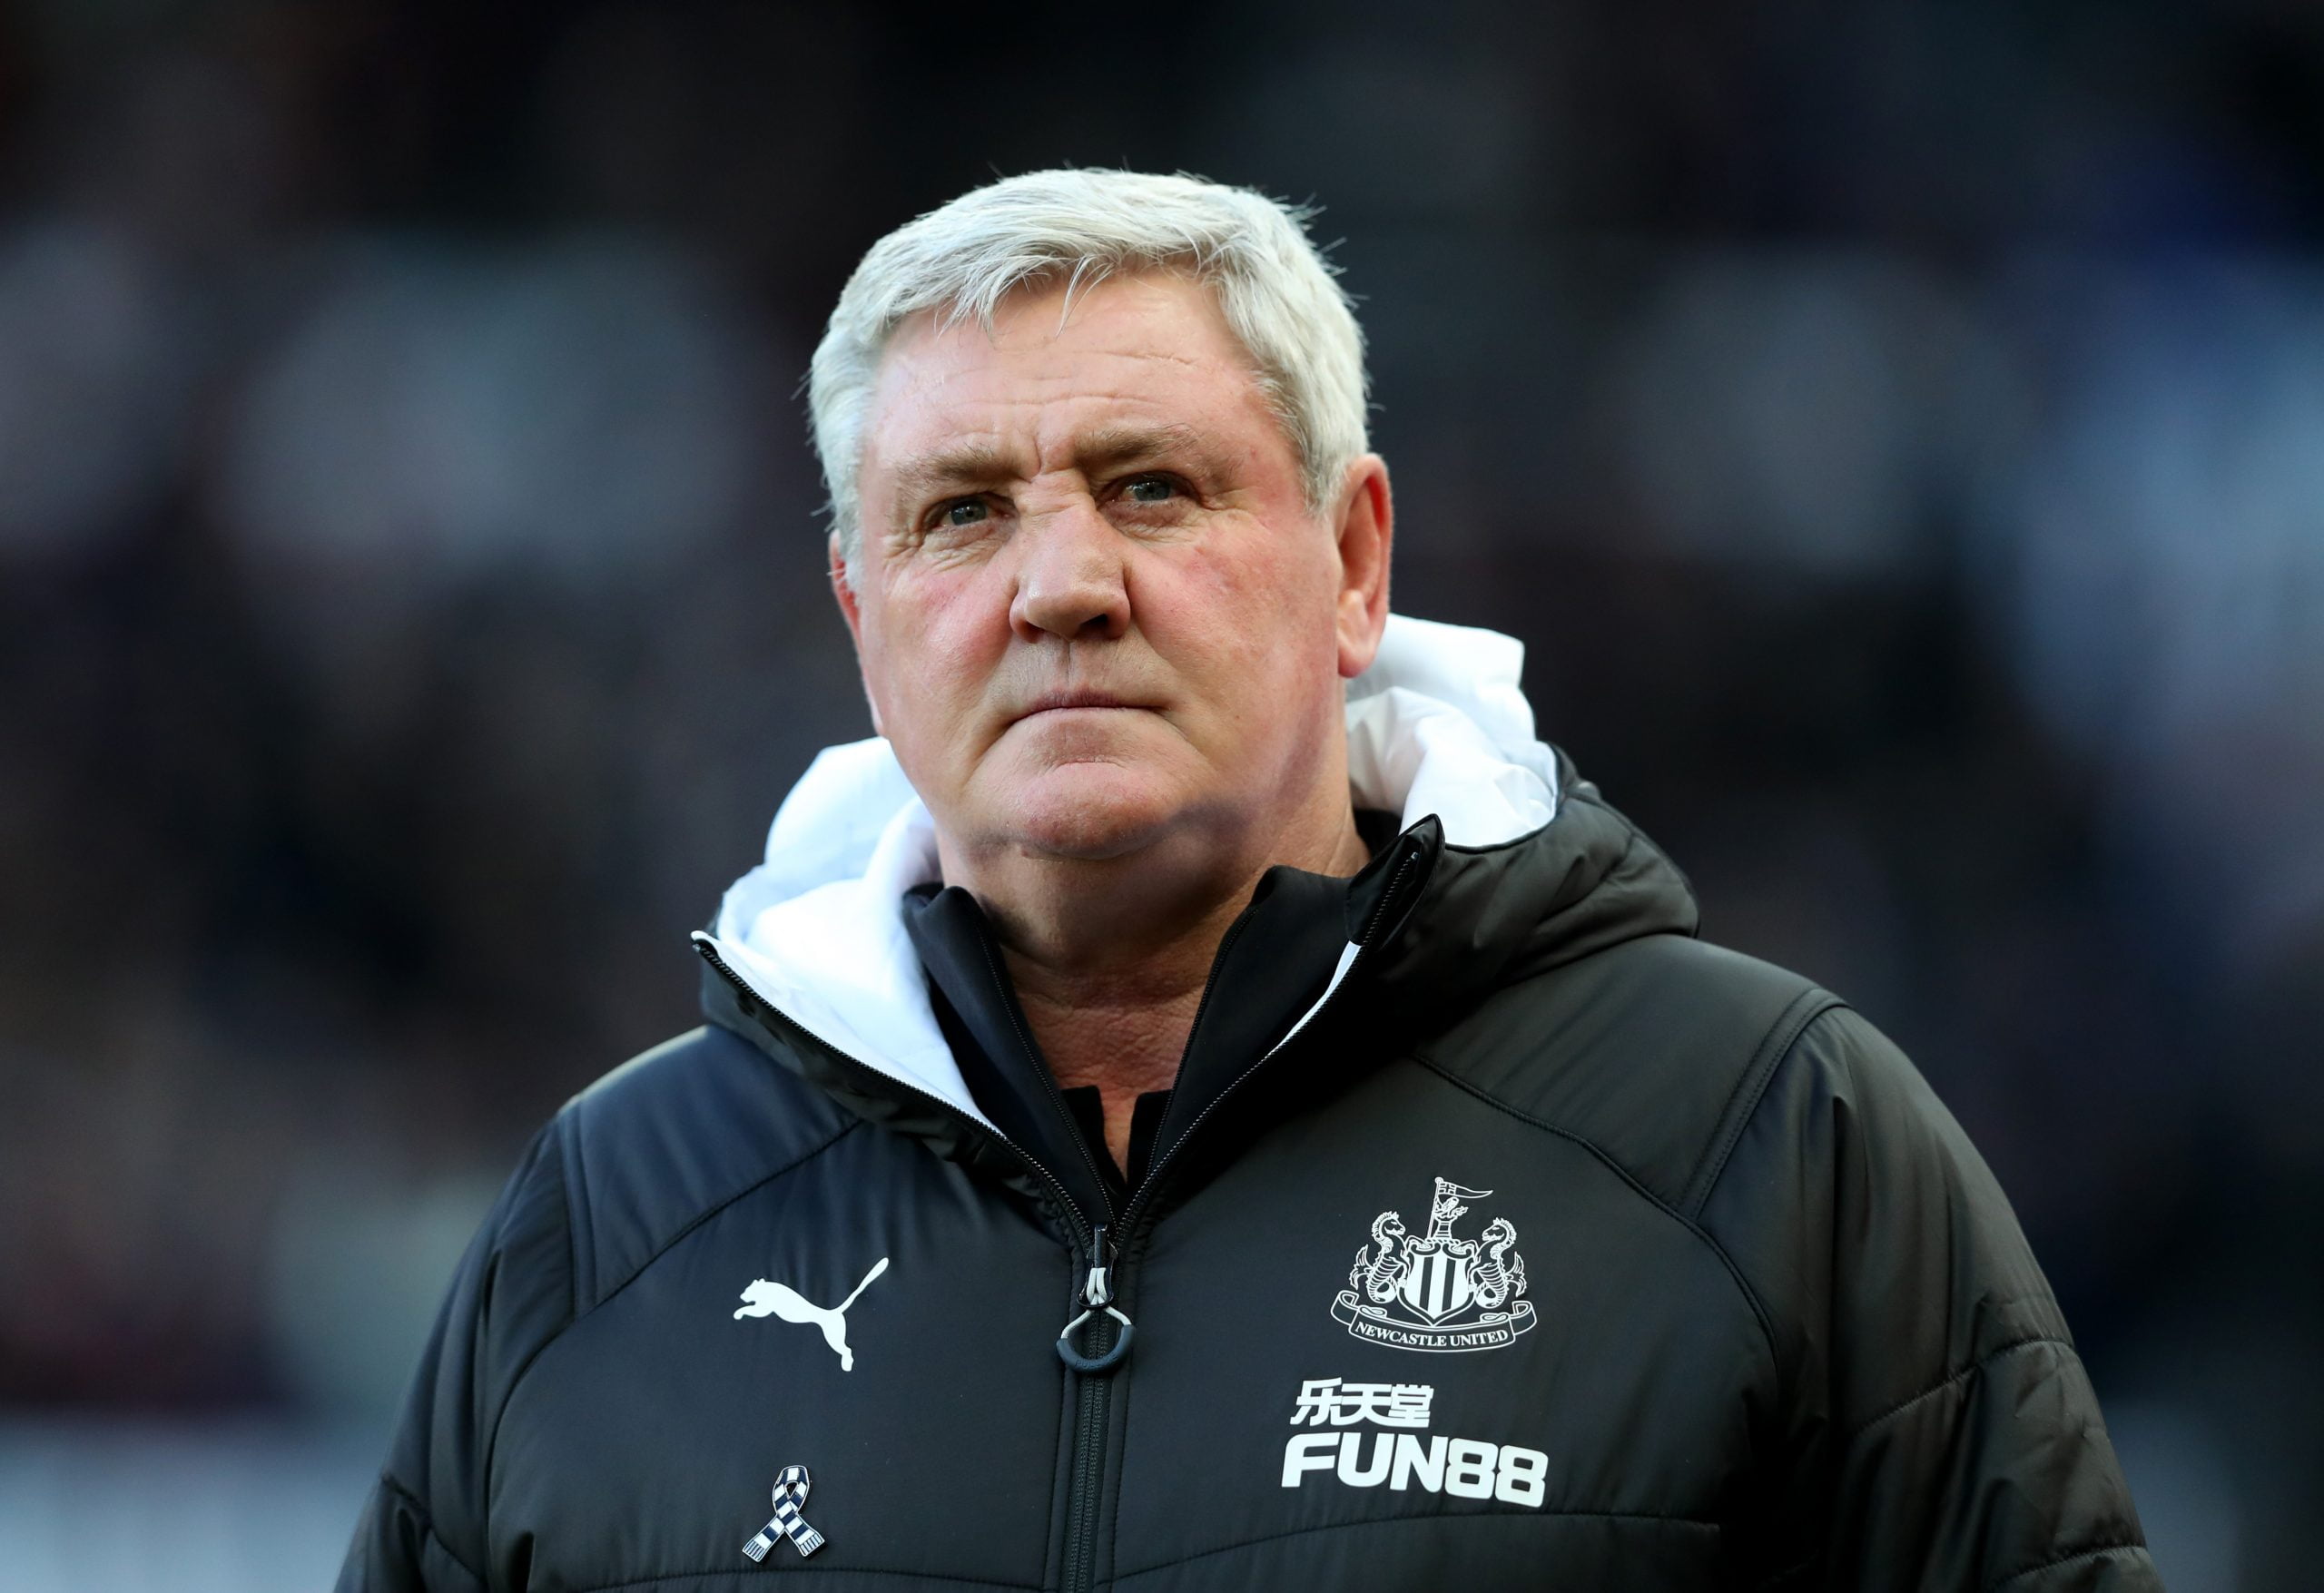 Newcastle United locked in a three-way battle for Meraş (Newcastle boss Steve Bruce is seen in the picture)